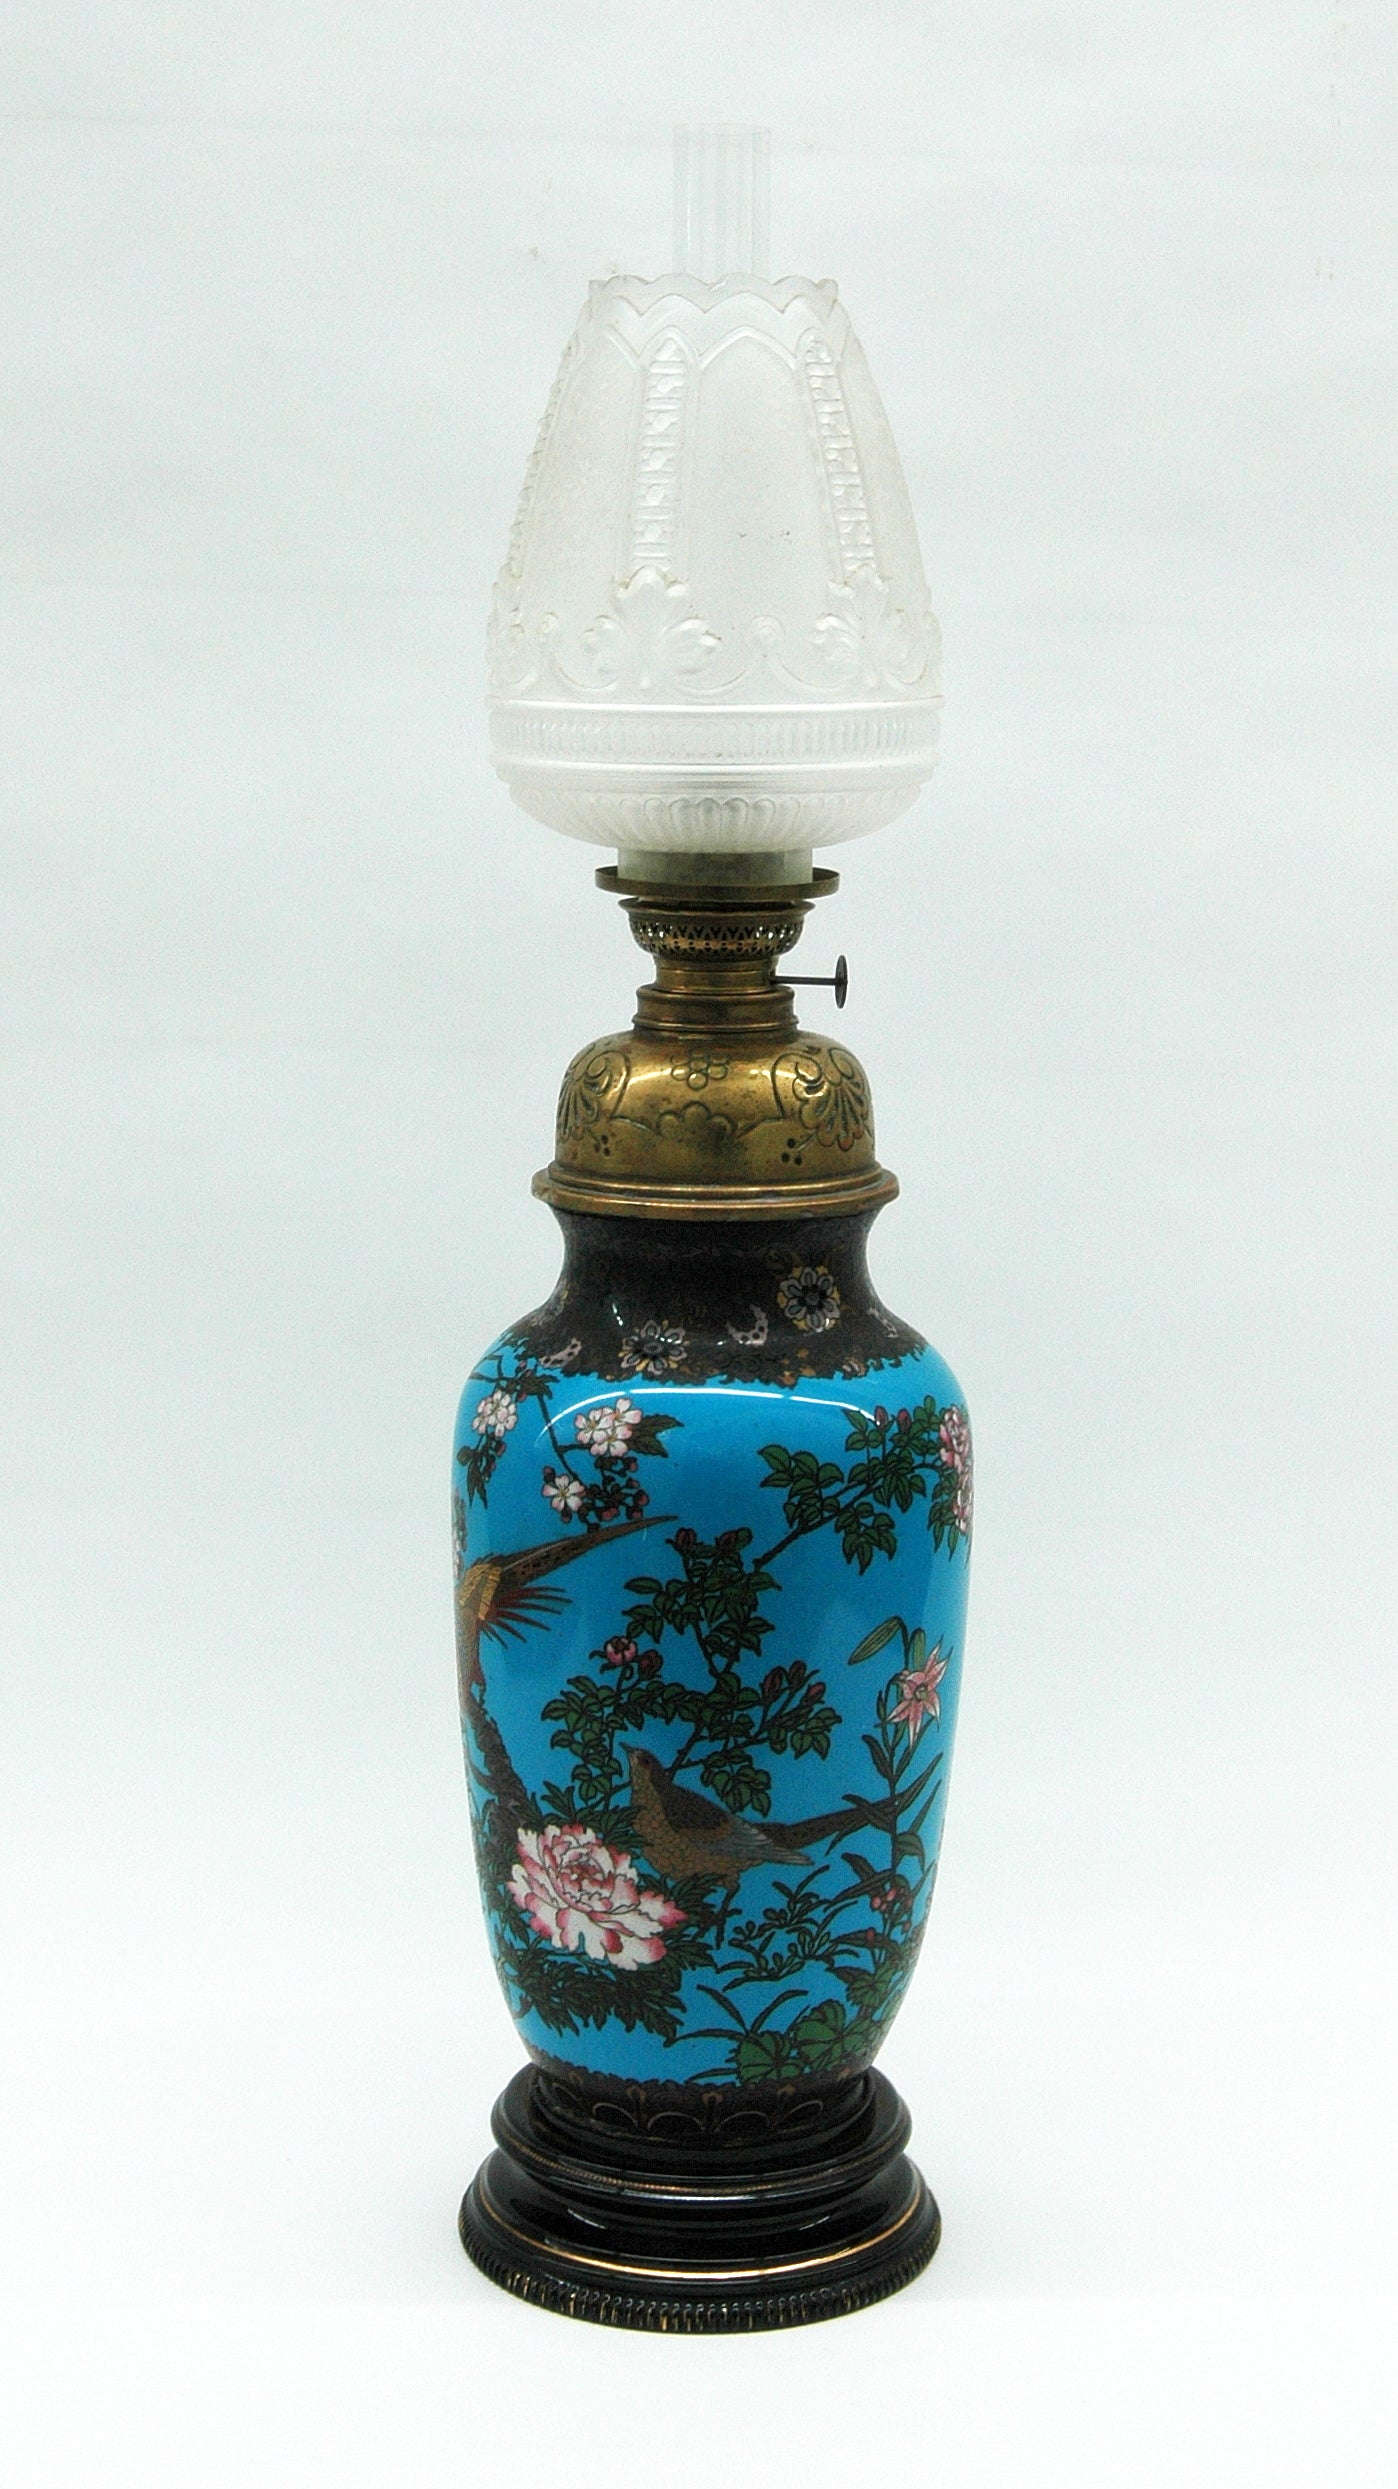 Cloisonné Oil Lamp by Theodore Deck